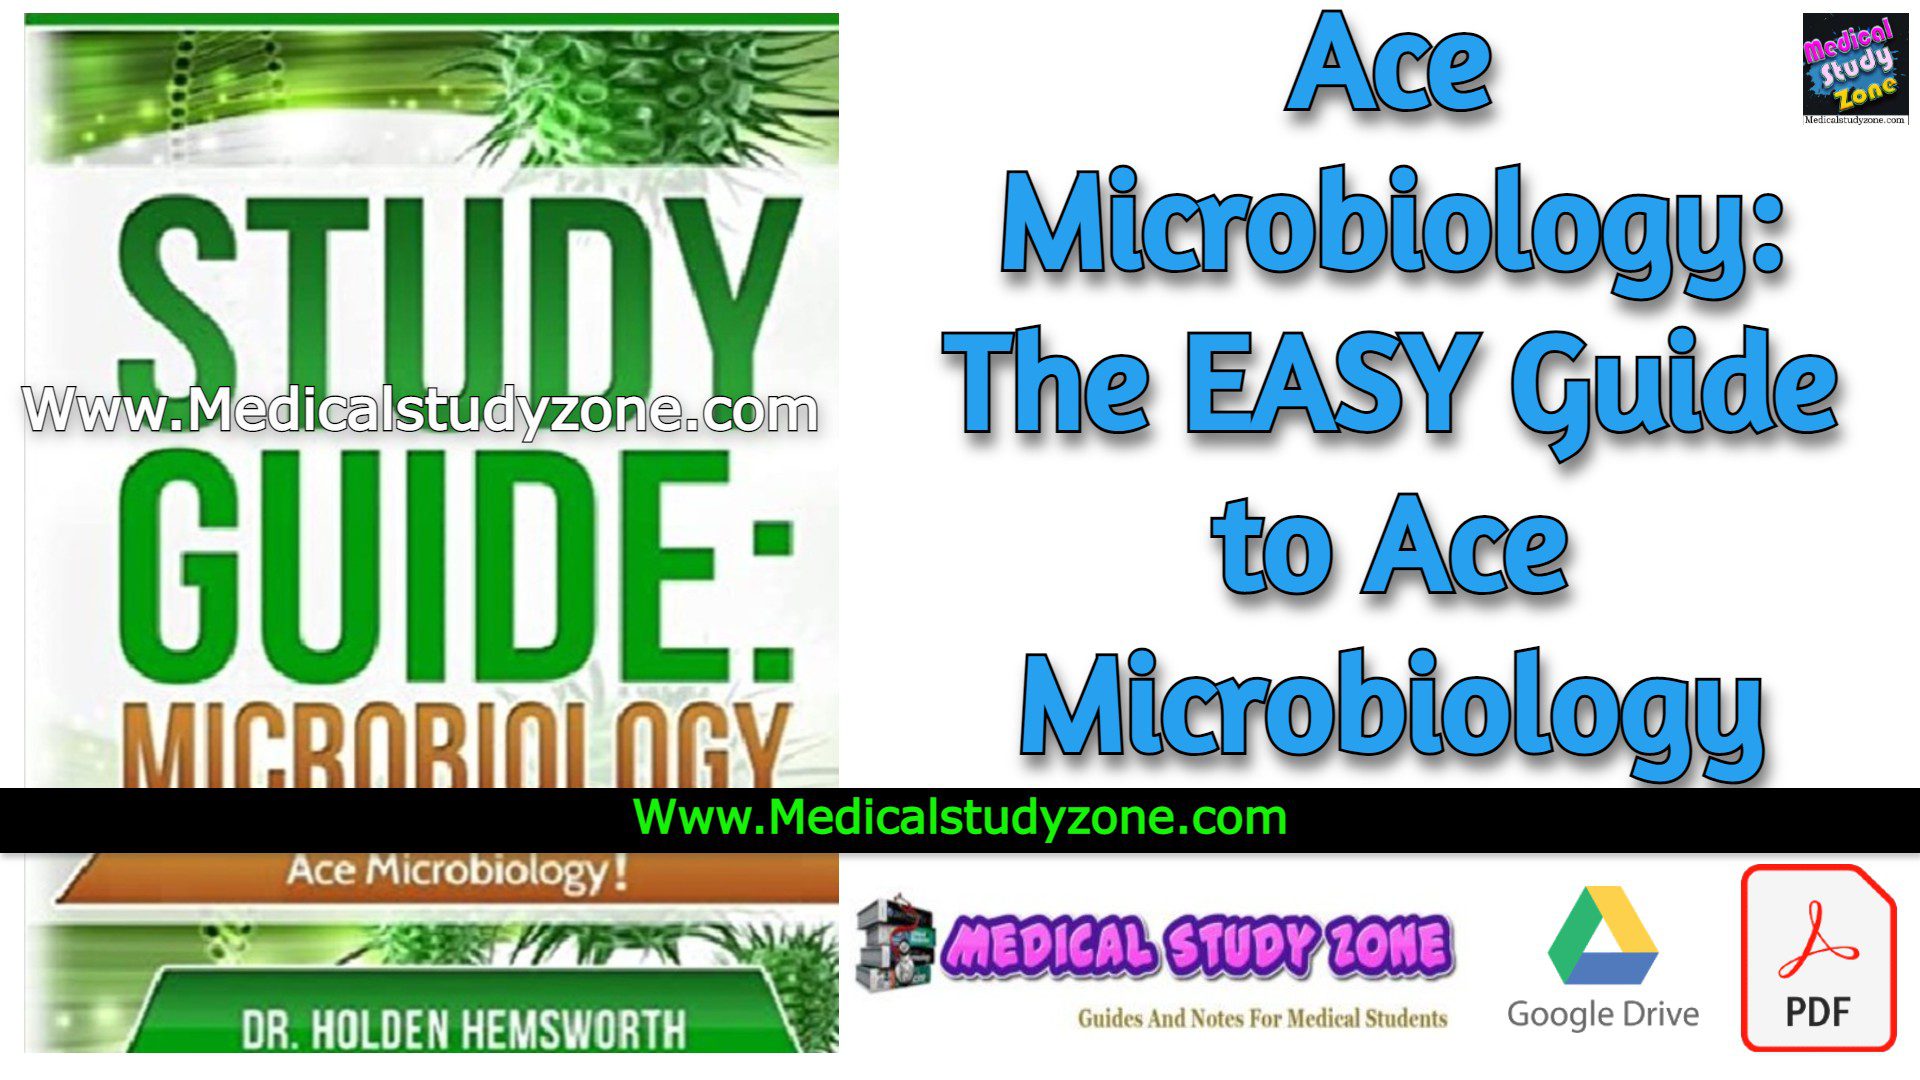 Ace Microbiology: The EASY Guide to Ace Microbiology PDF Free Download [Google Drive]